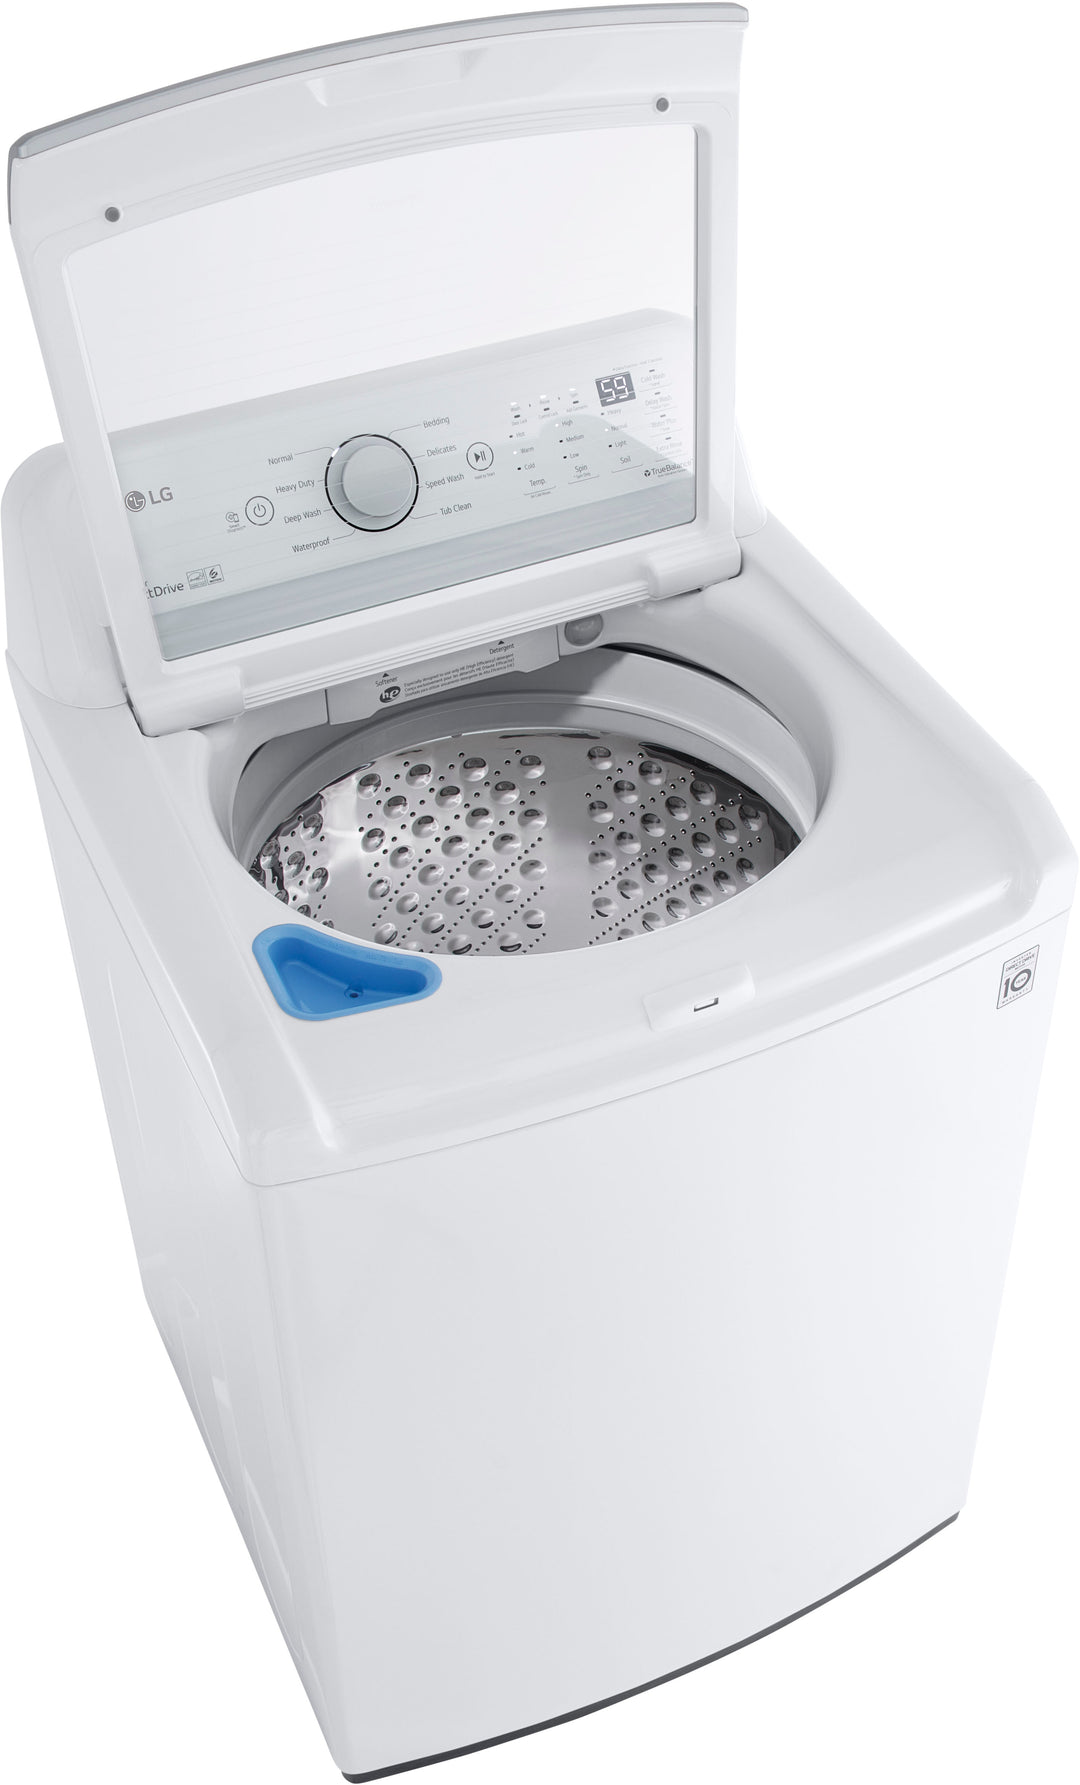 LG - 5.0 Cu. Ft. Smart Top Load Washer with 6Motion Technology - White_4